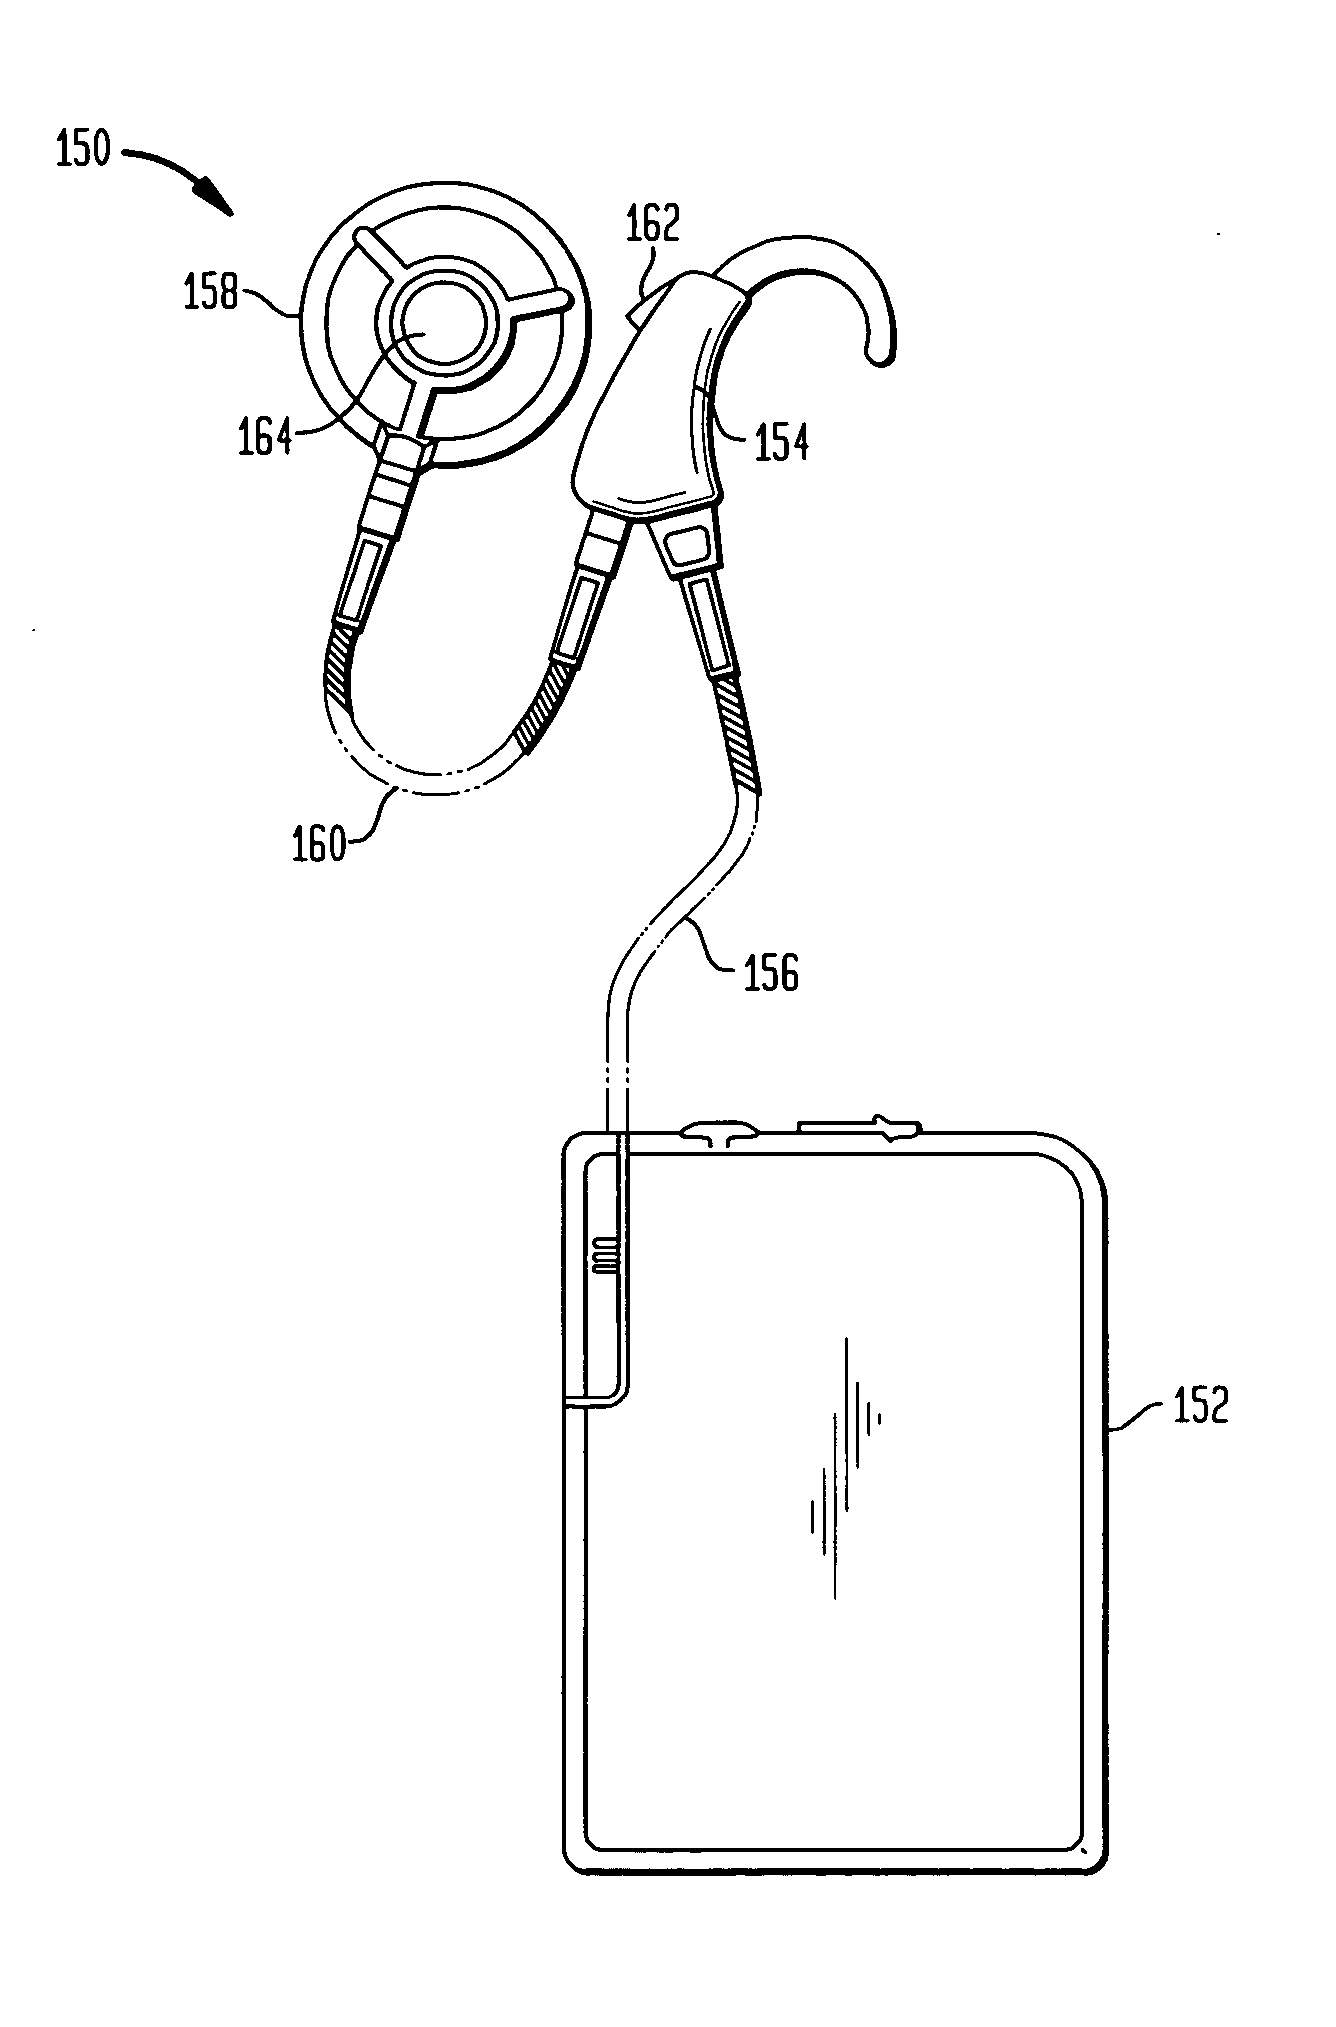 Medical device with magnetically-responsive control switch